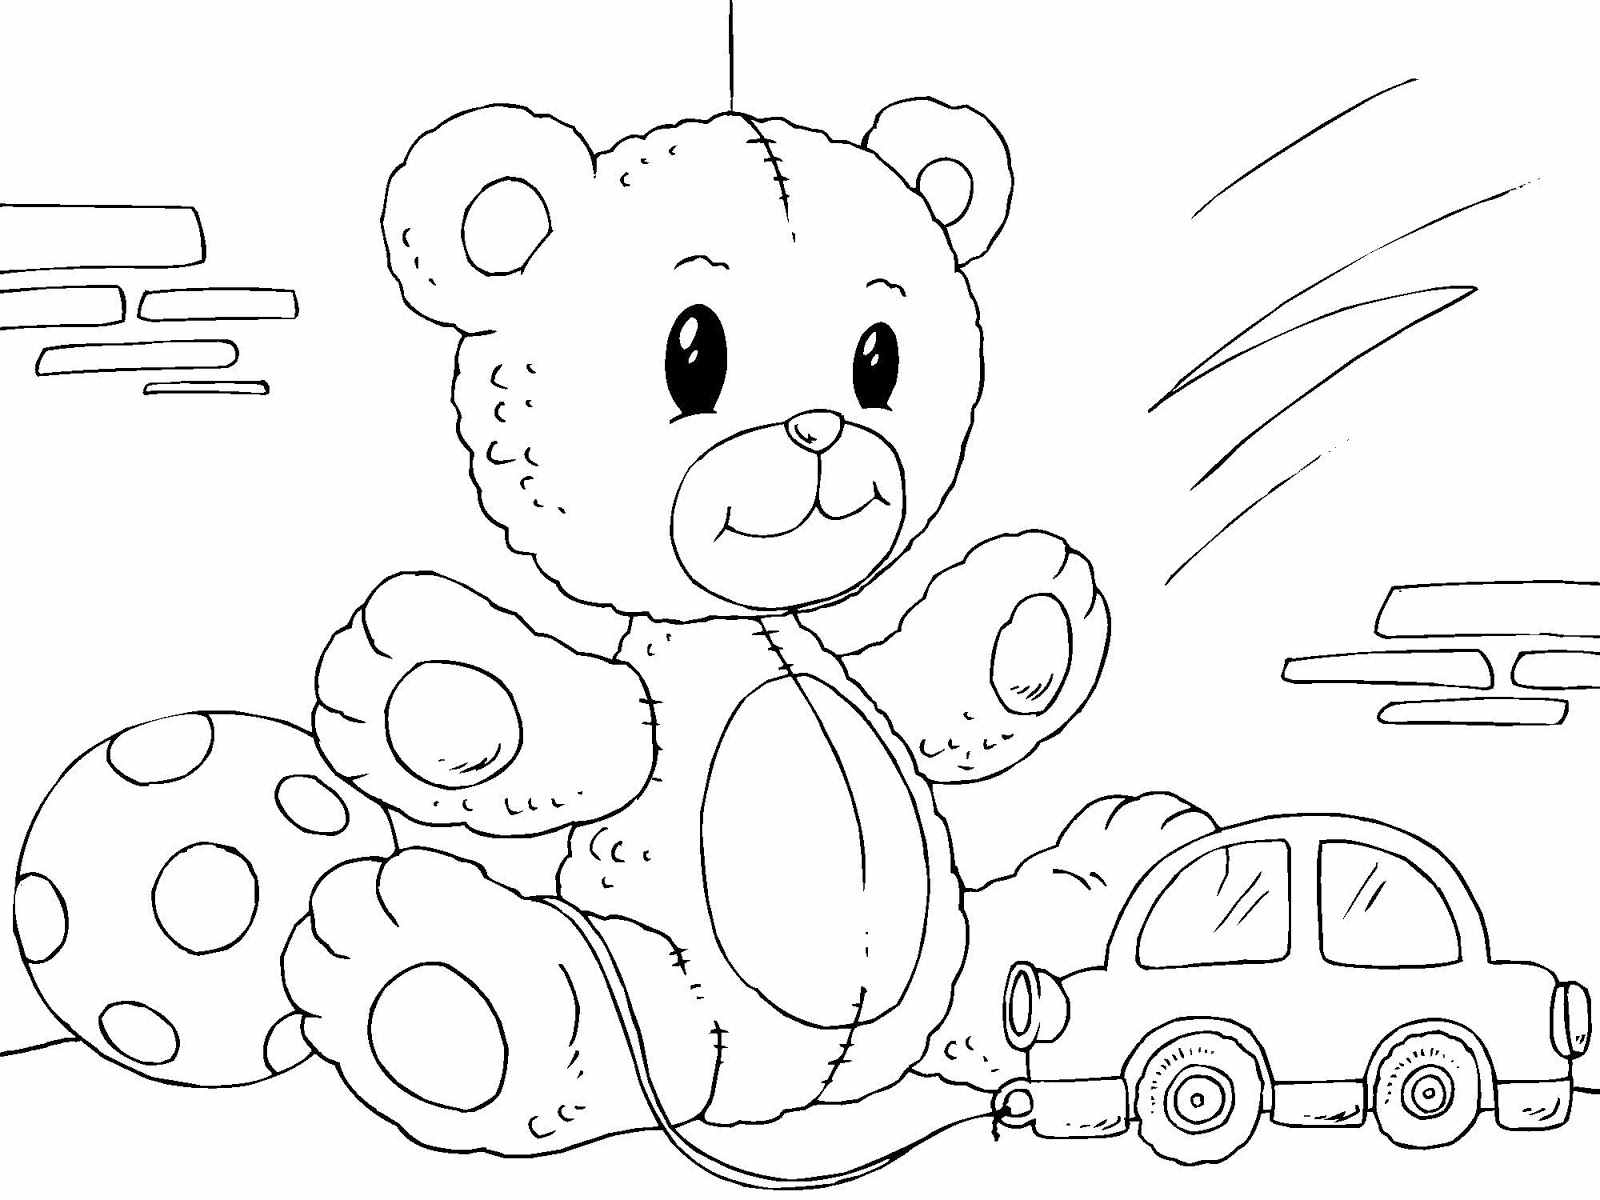 Fun teddy bear coloring book for 5-6 year olds